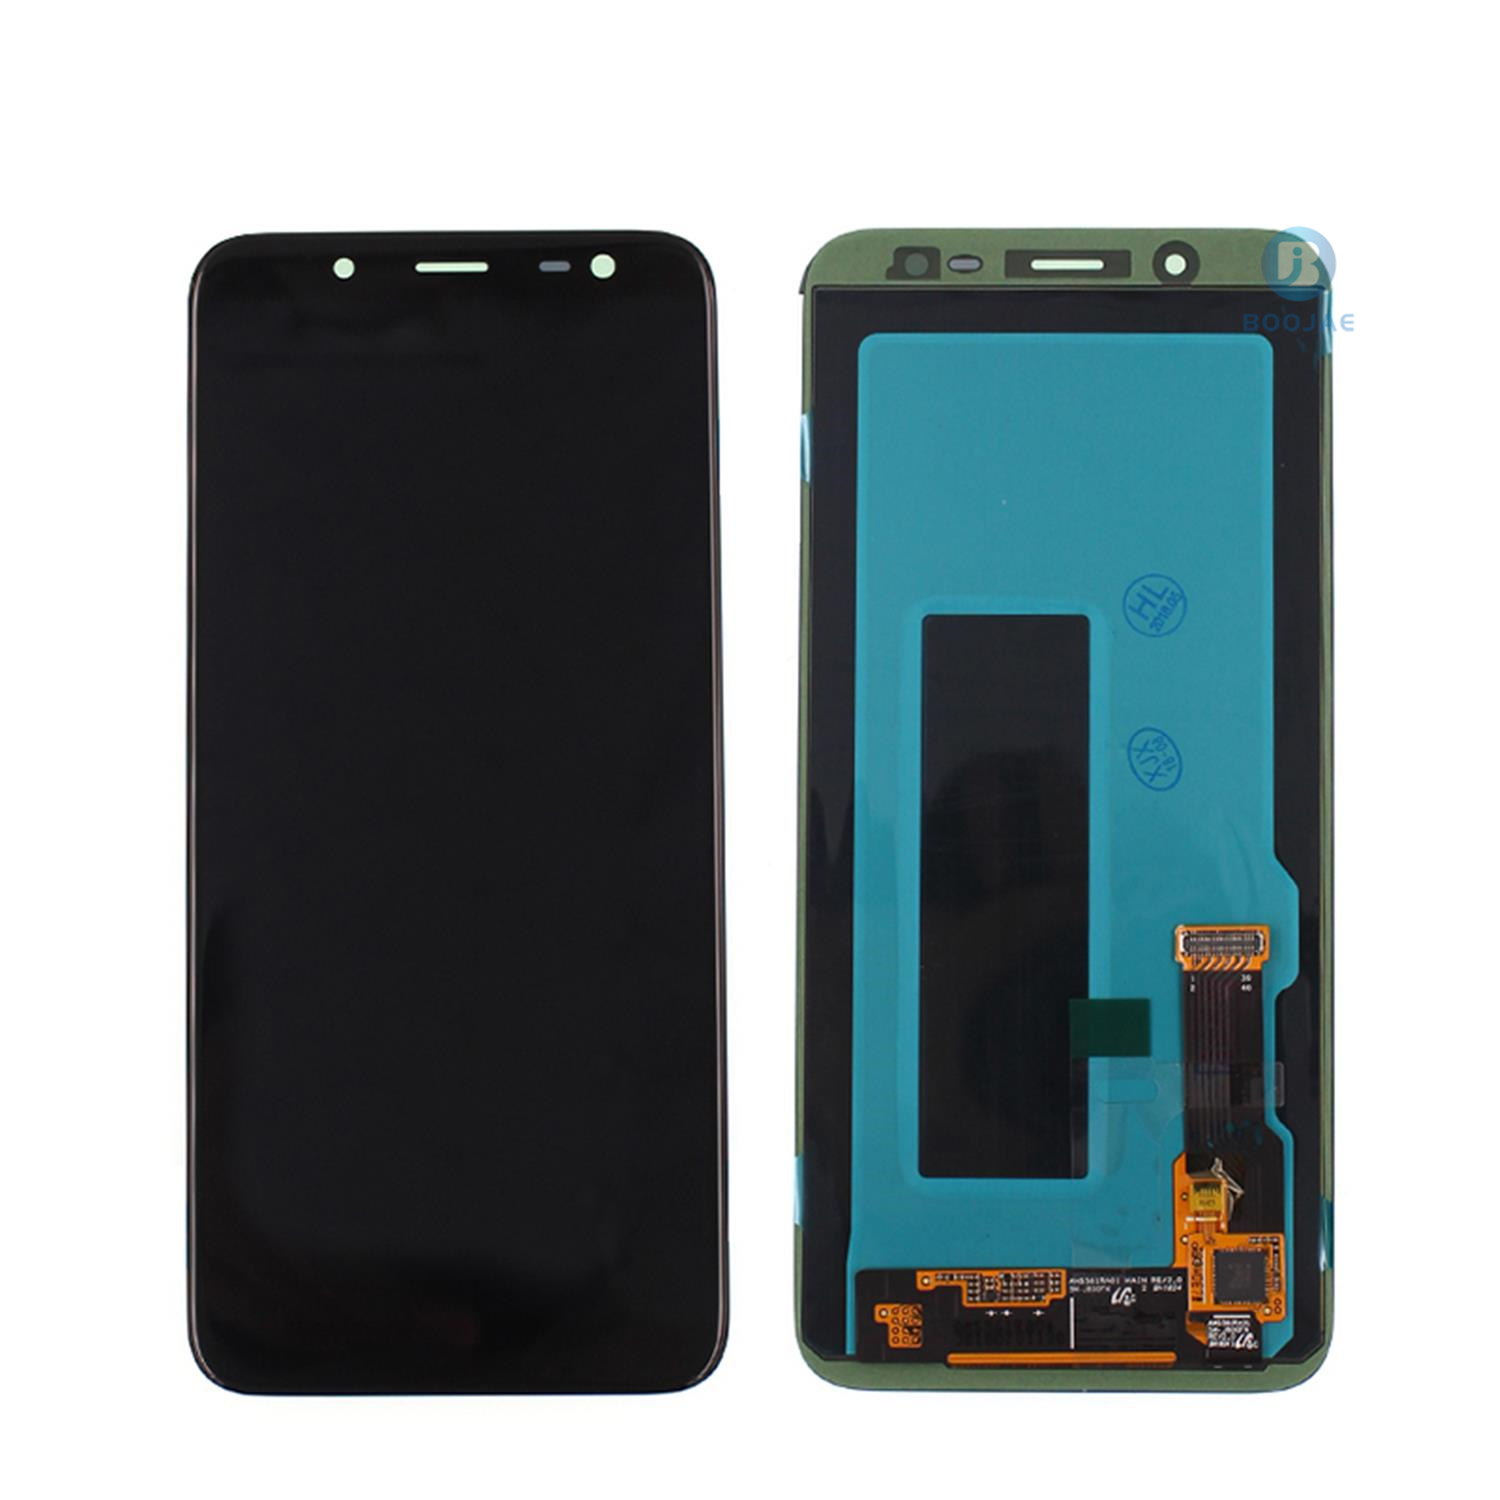 Samsung Galaxy J6 2018 J600 LCD Screen Display and Touch Panel Digitizer Assembly Replacement